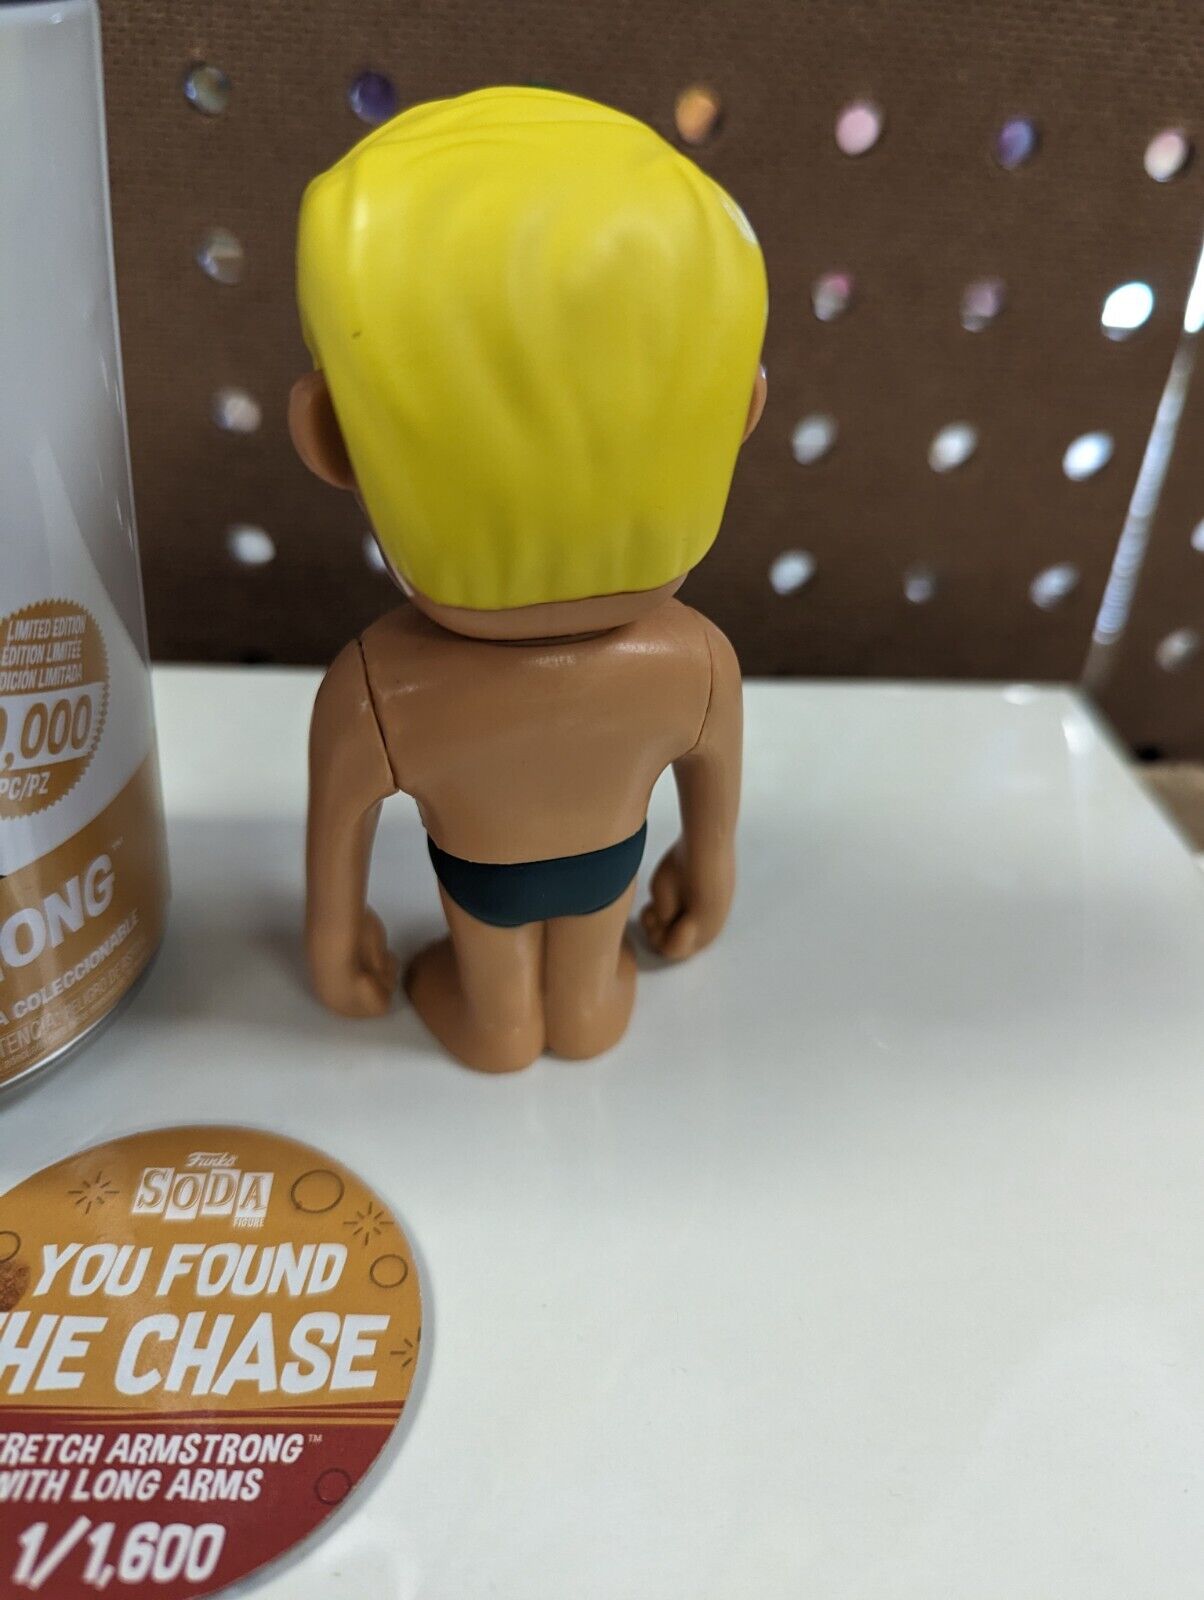 Funko Soda Stretch Armstrong With Long Arms Chase 1/1600